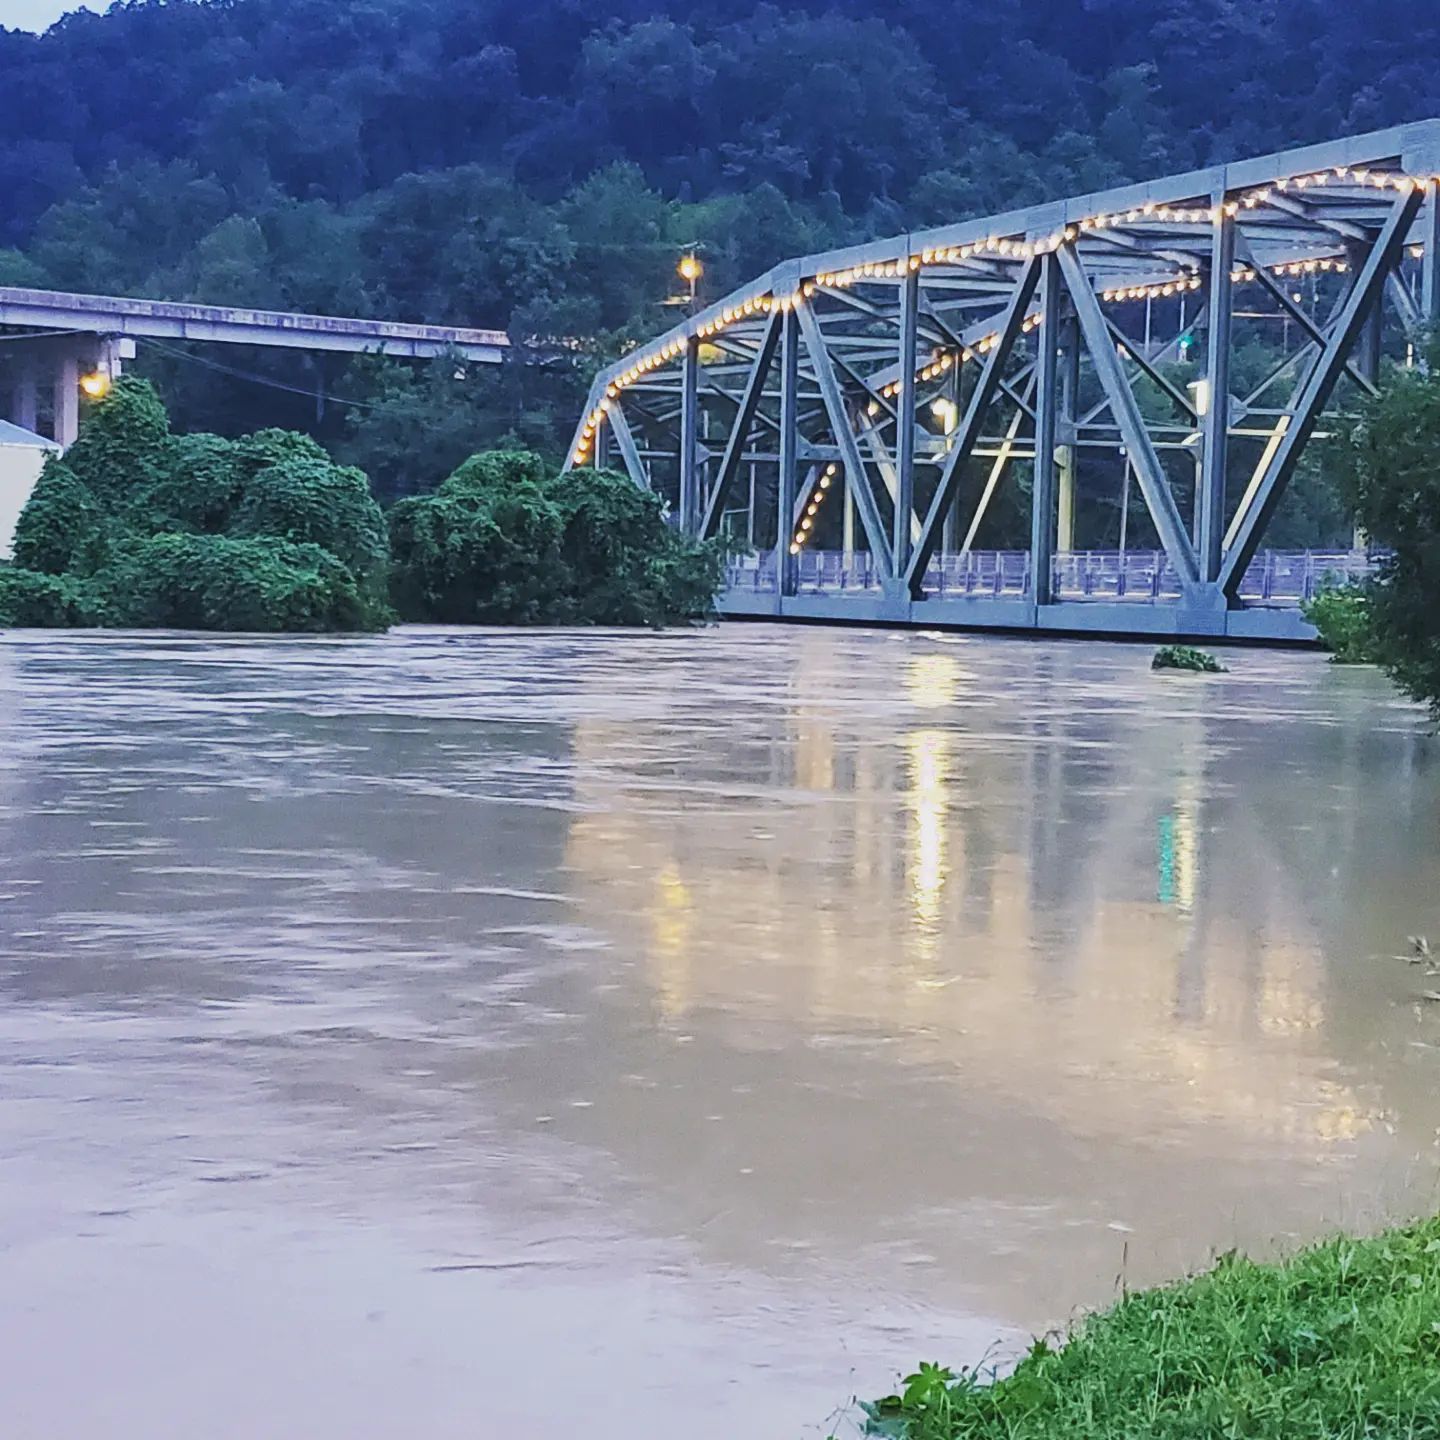 North Fork Kentucky River at Hazard, showing river levels touching the bridge